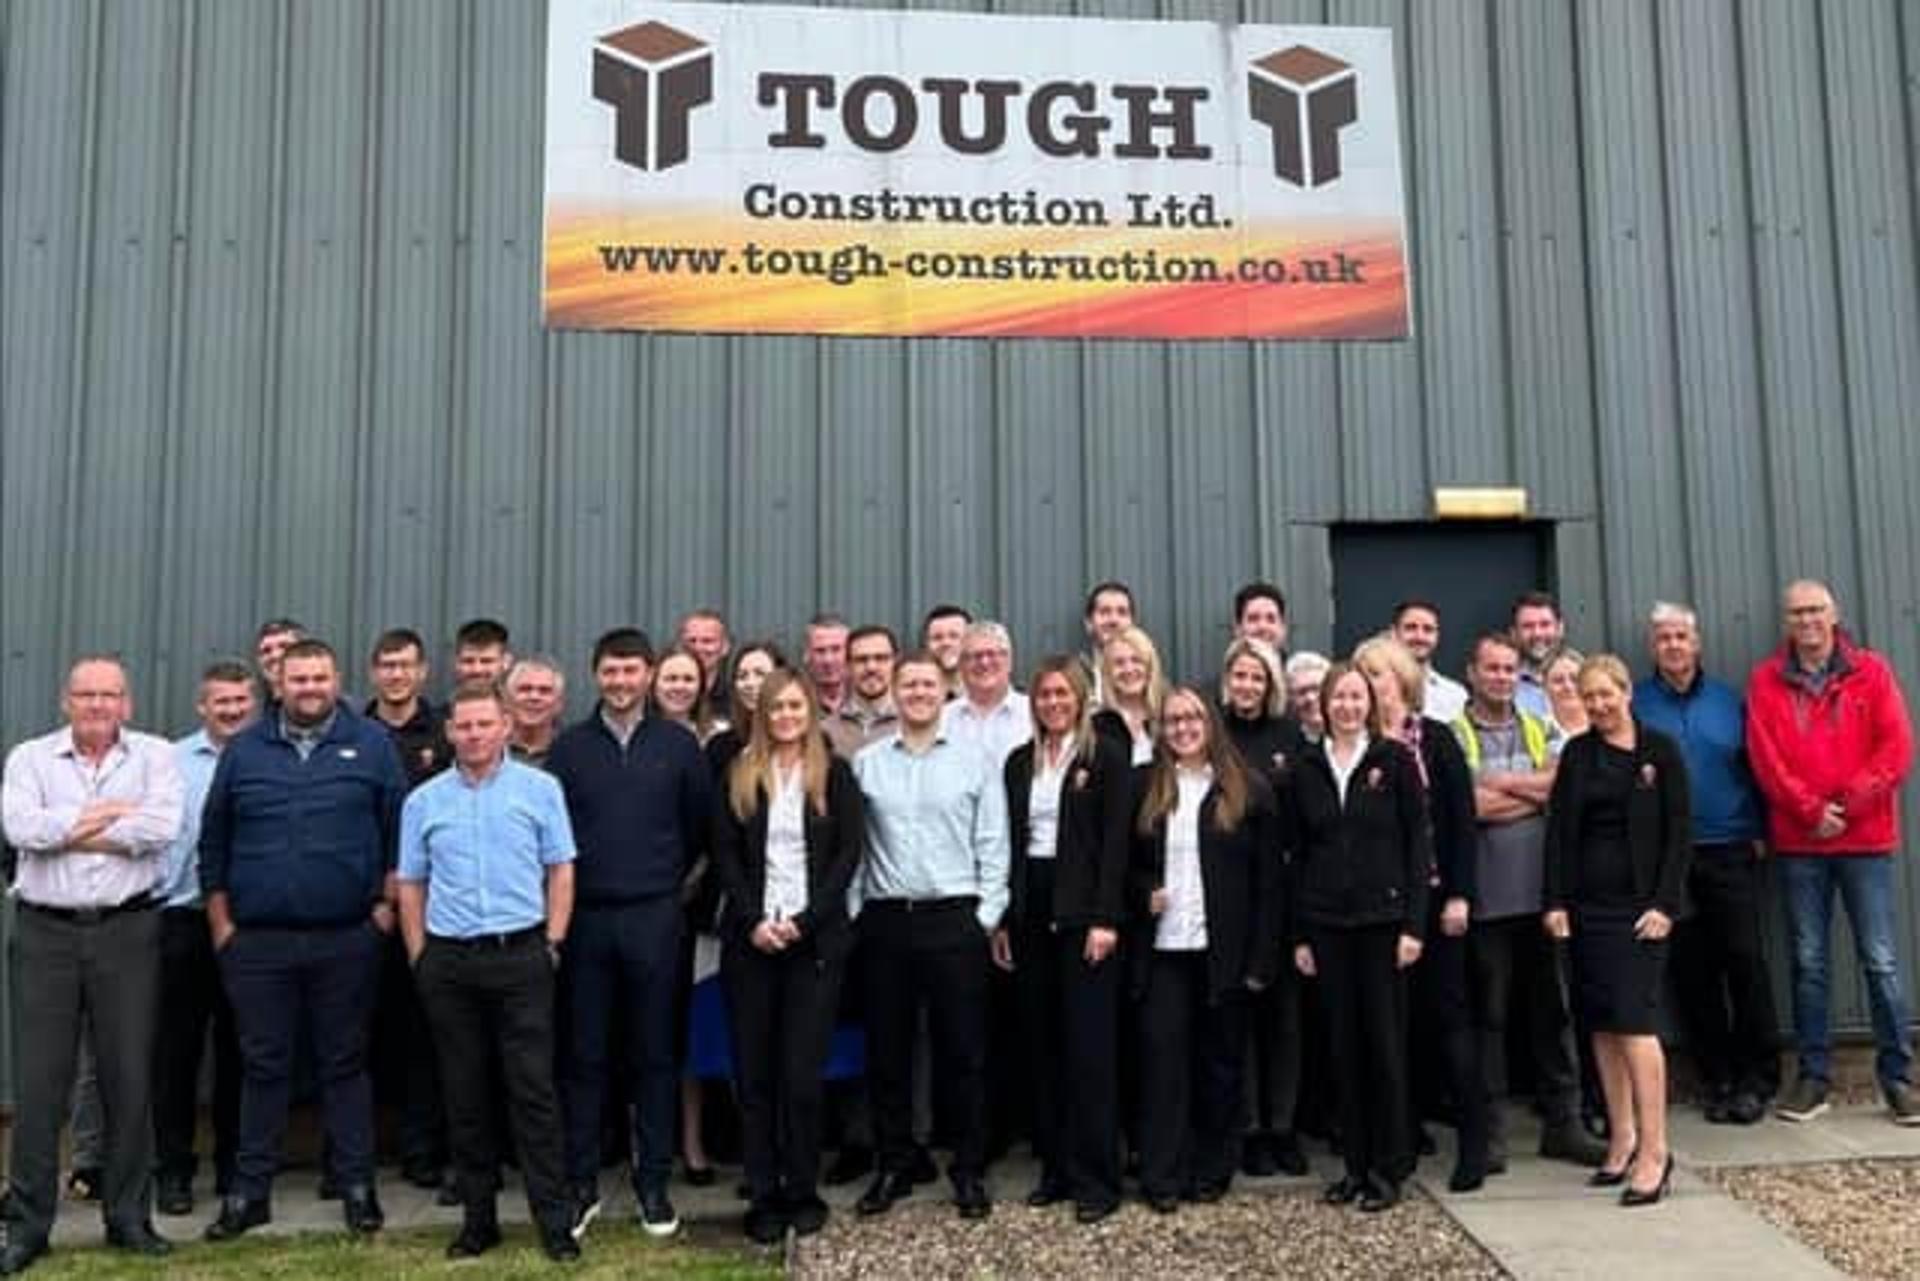 Glasgow construction firm acquired by EOT